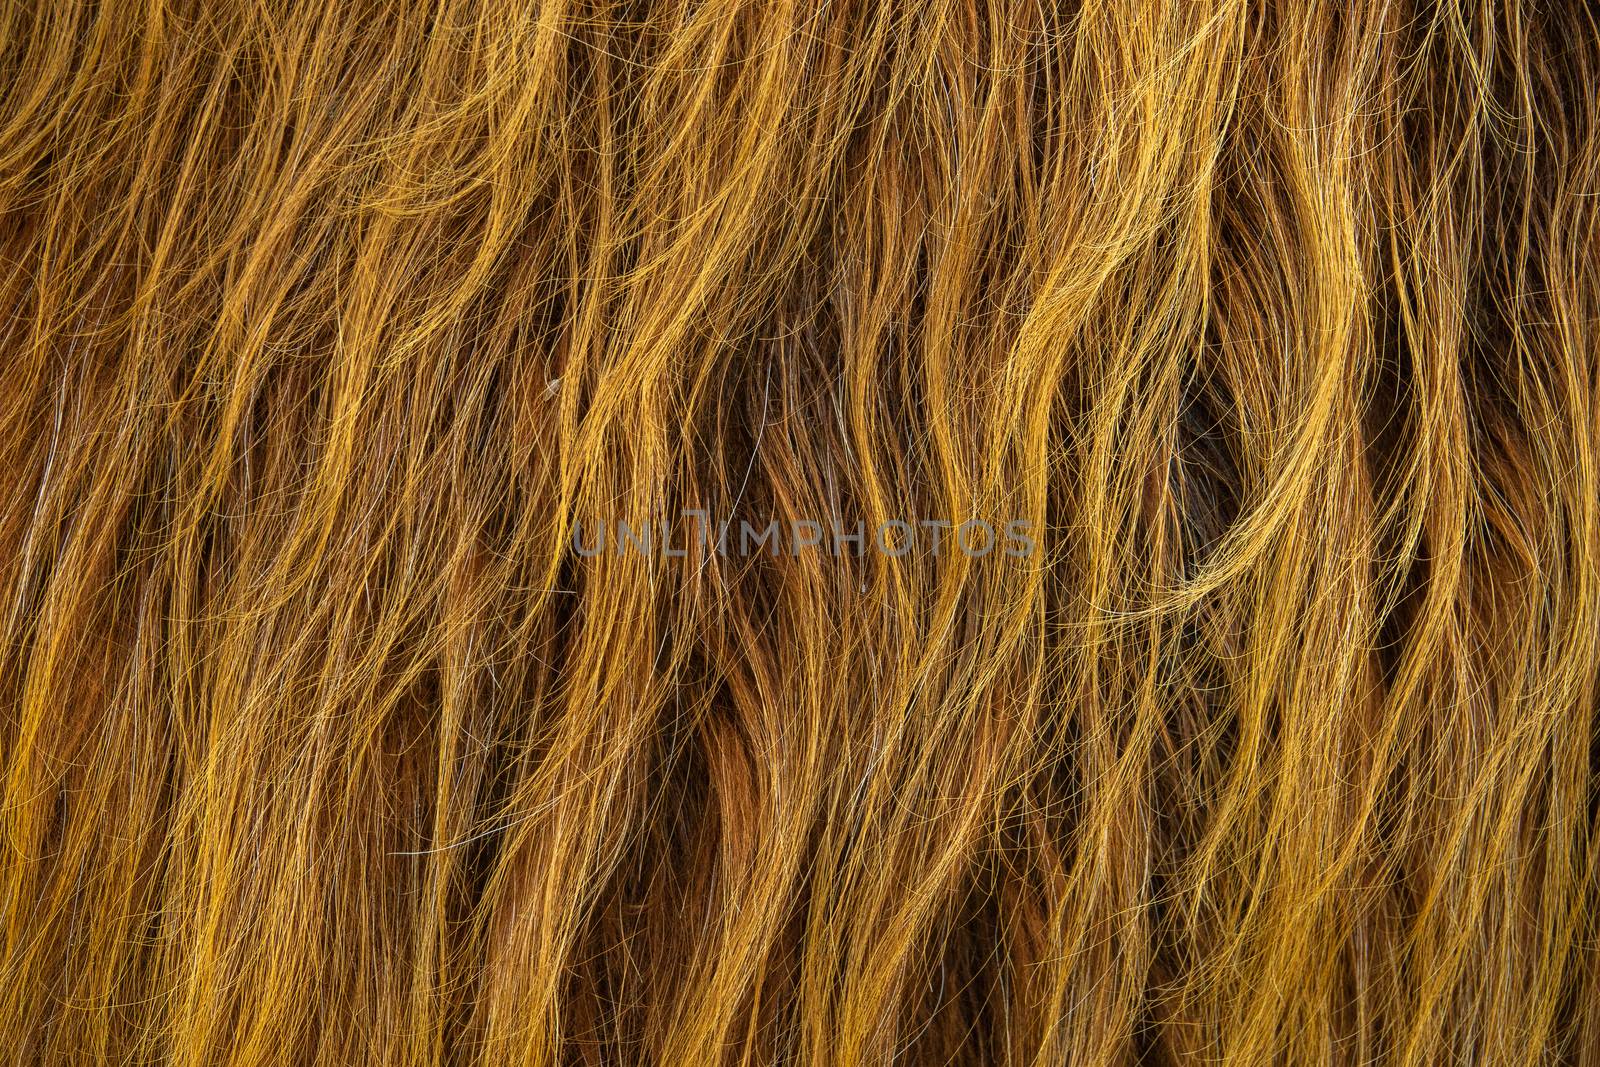 Background Texture Of The Wild Red Hair Of A Scottish Highland Cow